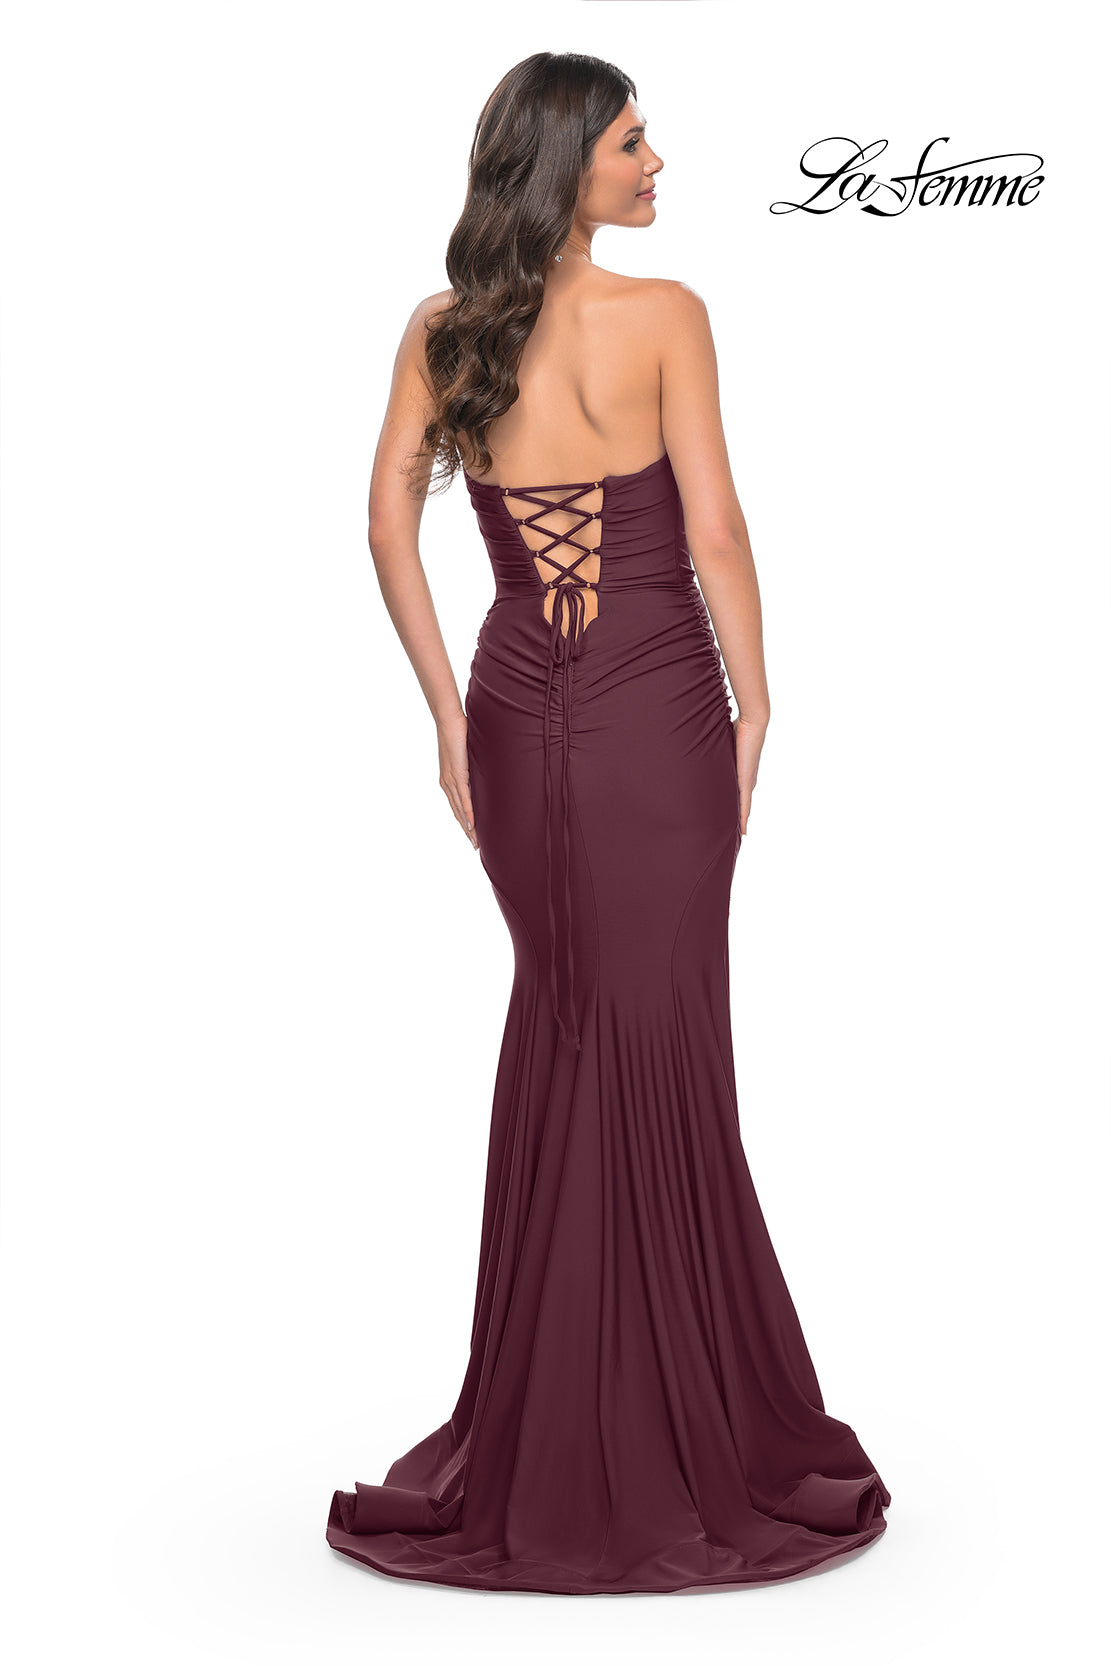 La-Femme-32289-Sweetheart-Neckline-Lace-up-Back-Ruched-Jersey-Fitted-Dark-Wine-Evening-Dress-B-Chic-Fashions-Prom-Dress